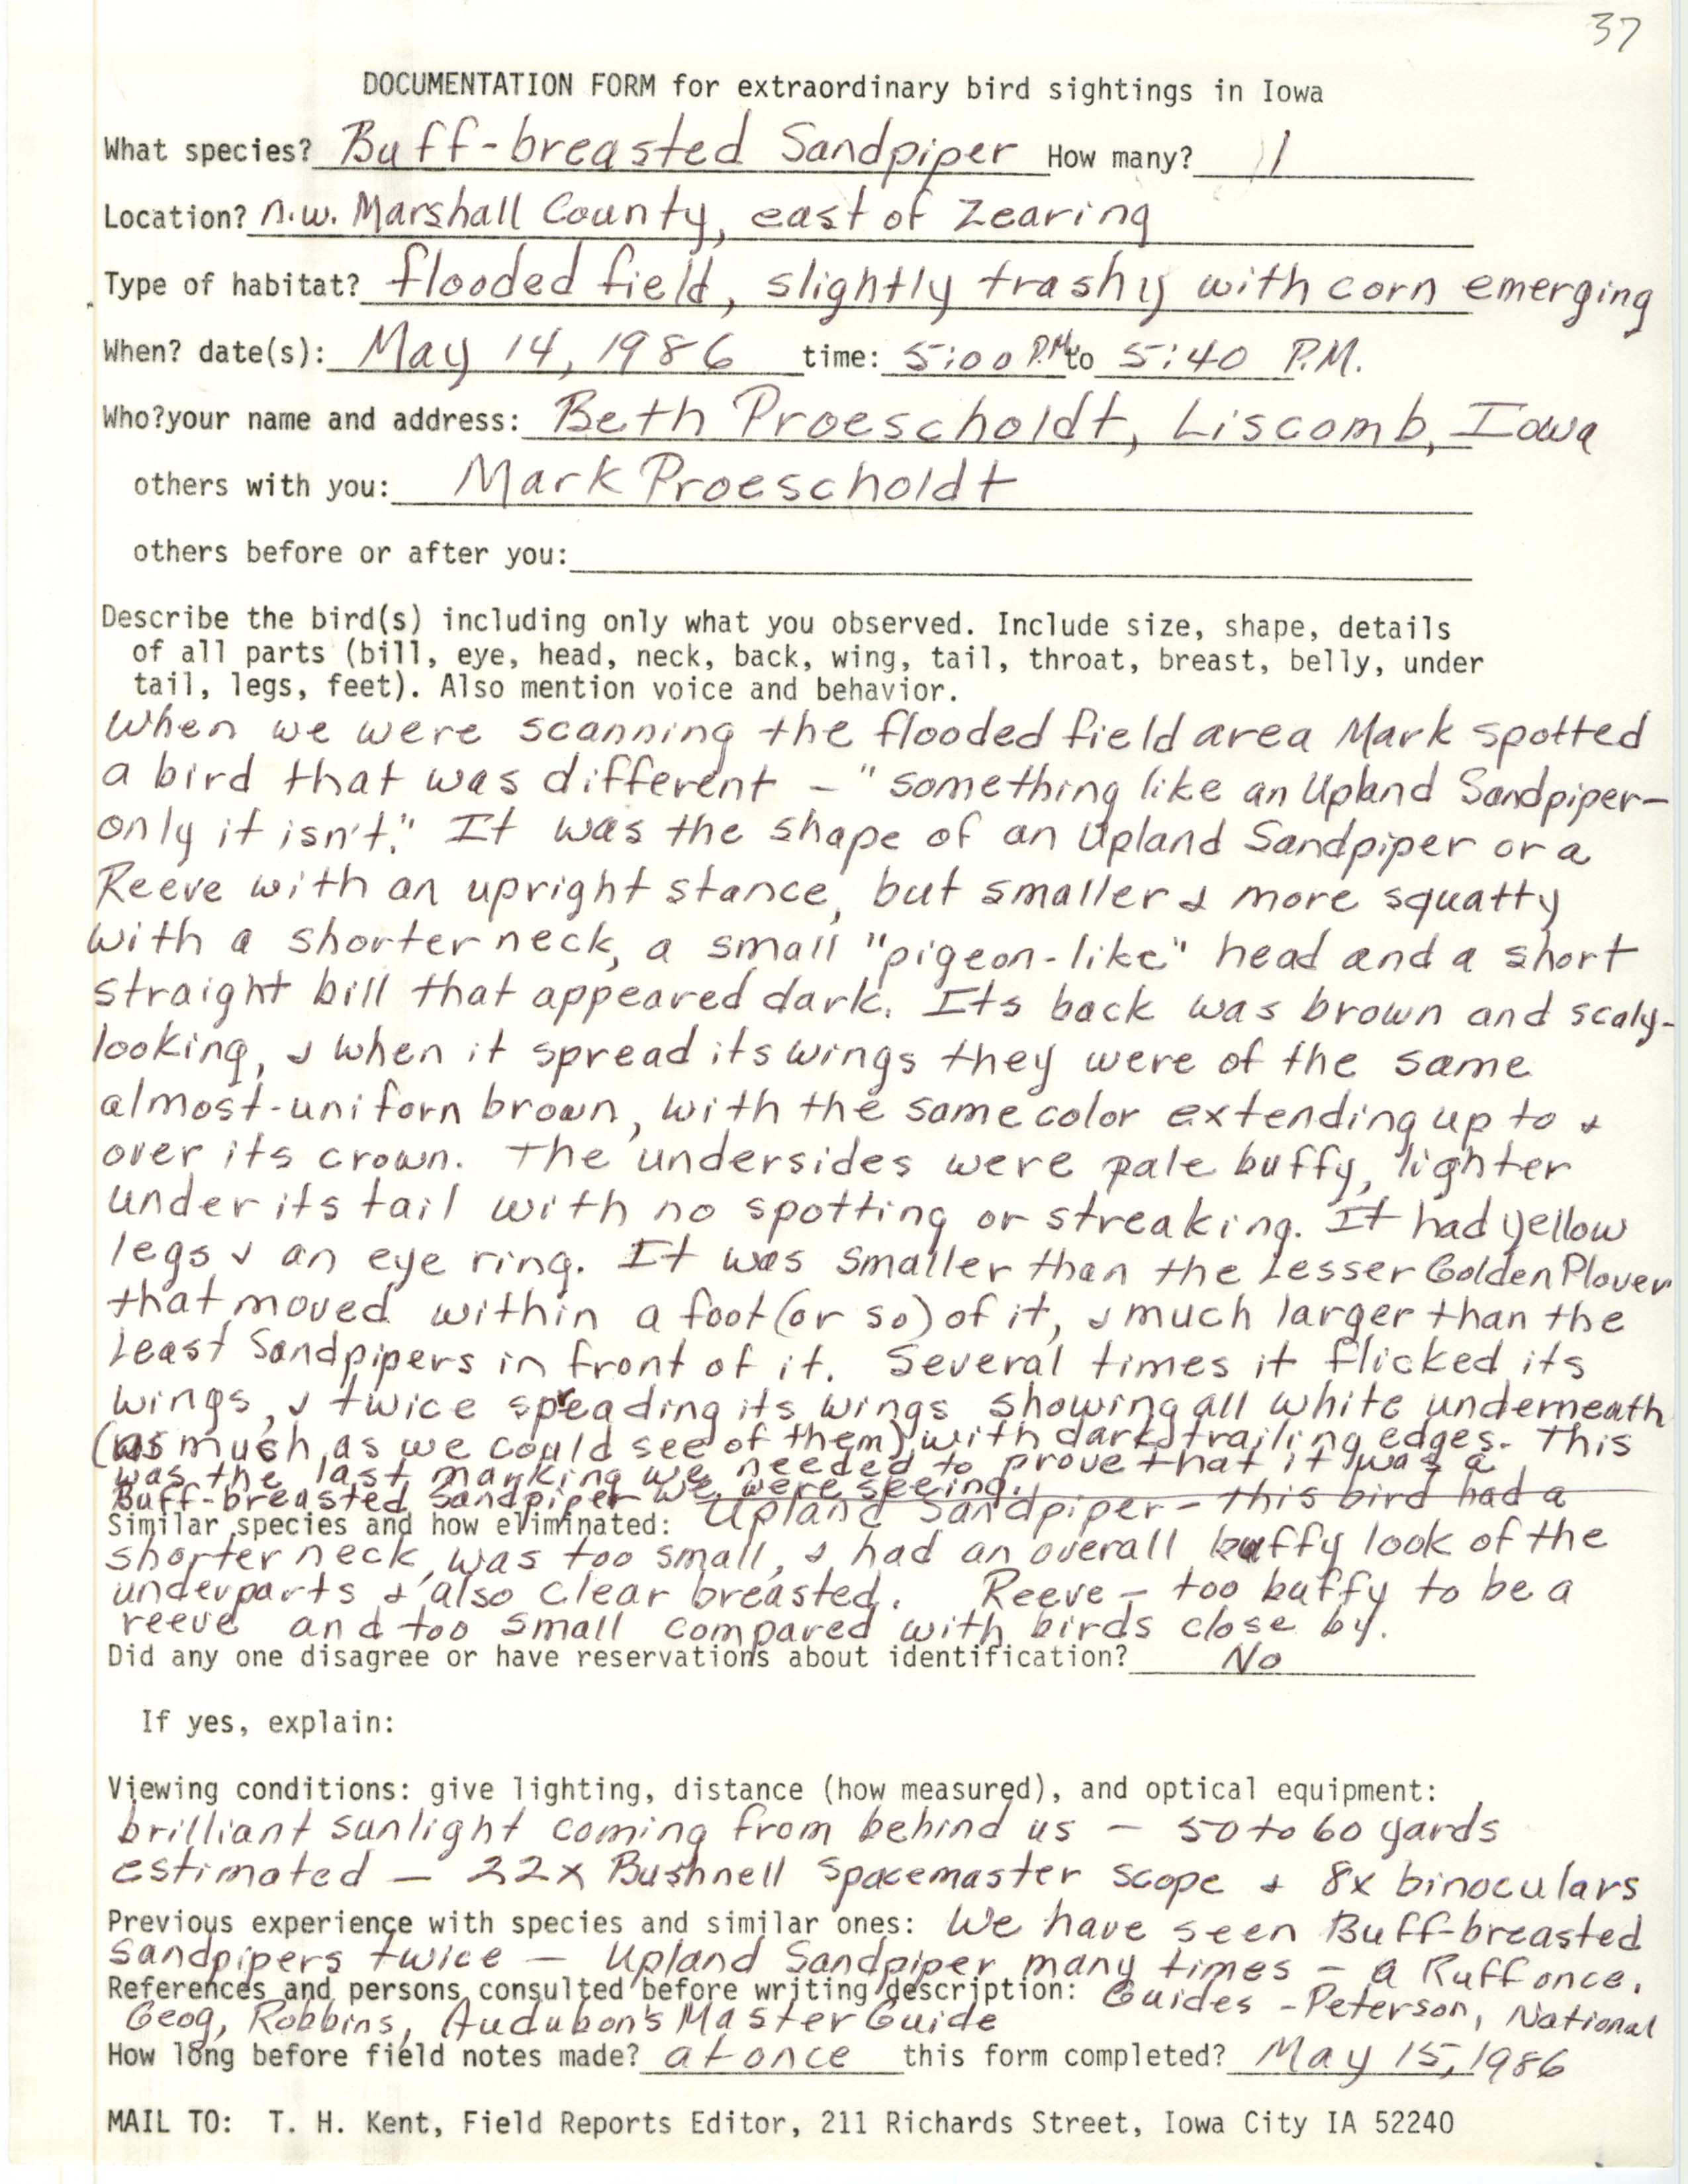 Rare bird documentation form for Buff-breasted Sandpiper east of Zearing, 1986